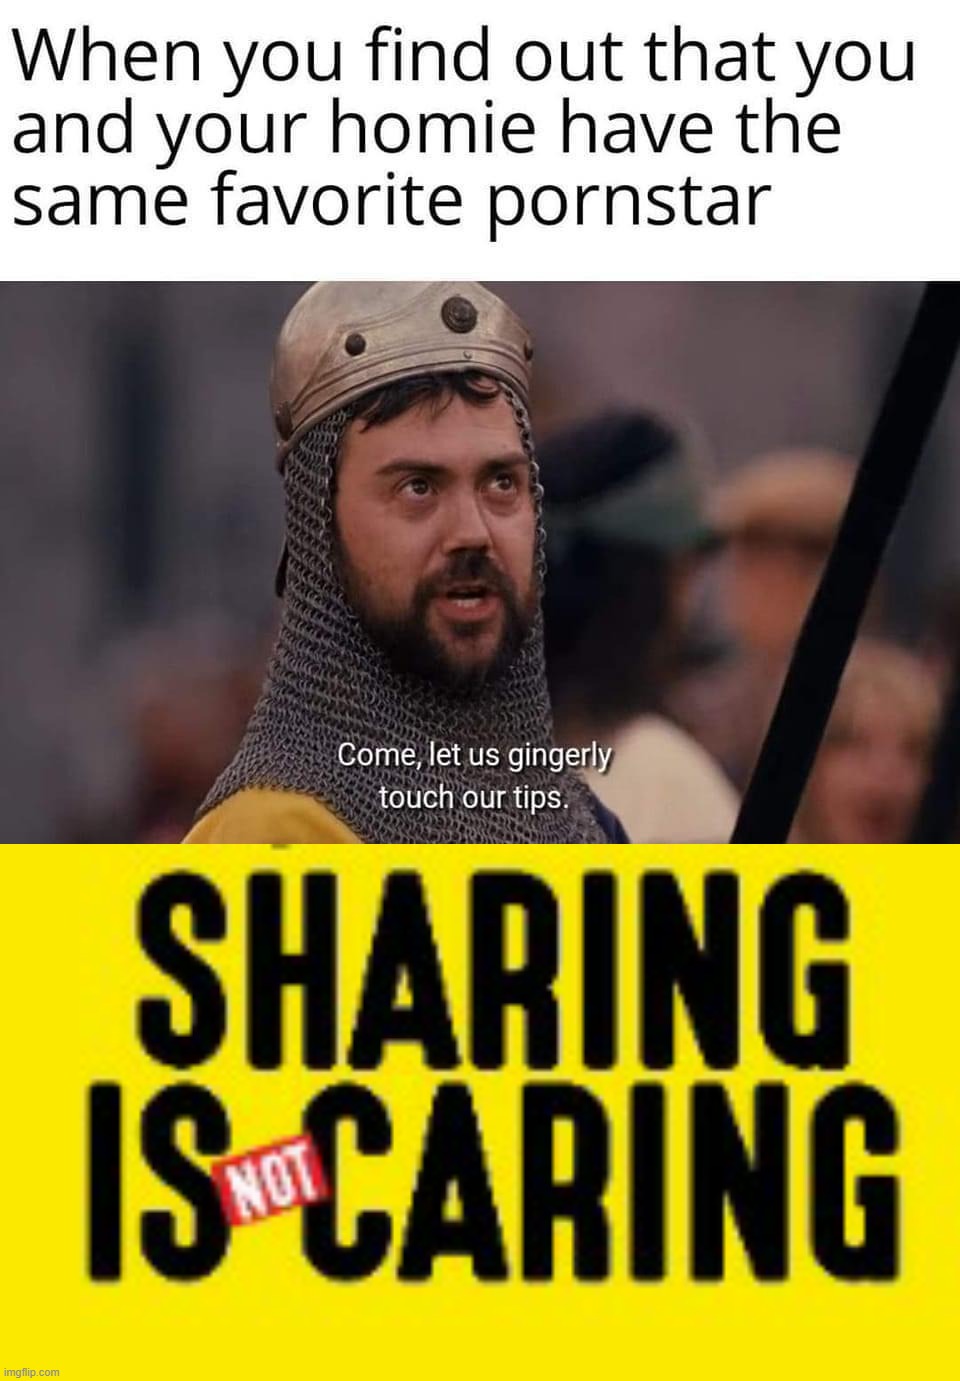 sharing | image tagged in sharing is not caring template | made w/ Imgflip meme maker